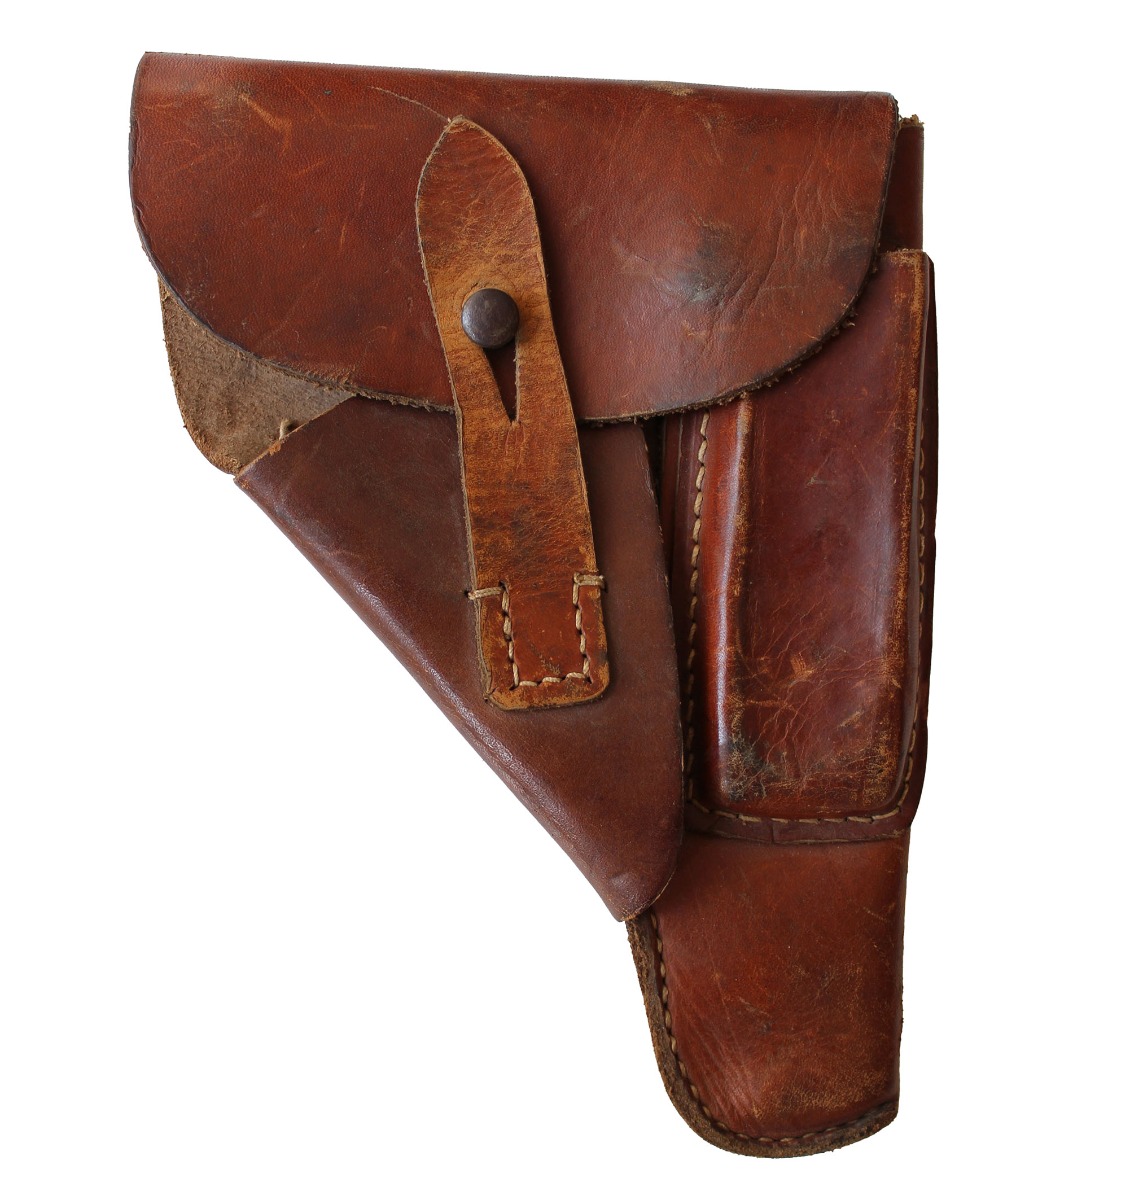 WW2 GERMAN WALTHER PPK LEATHER HOLSTER 